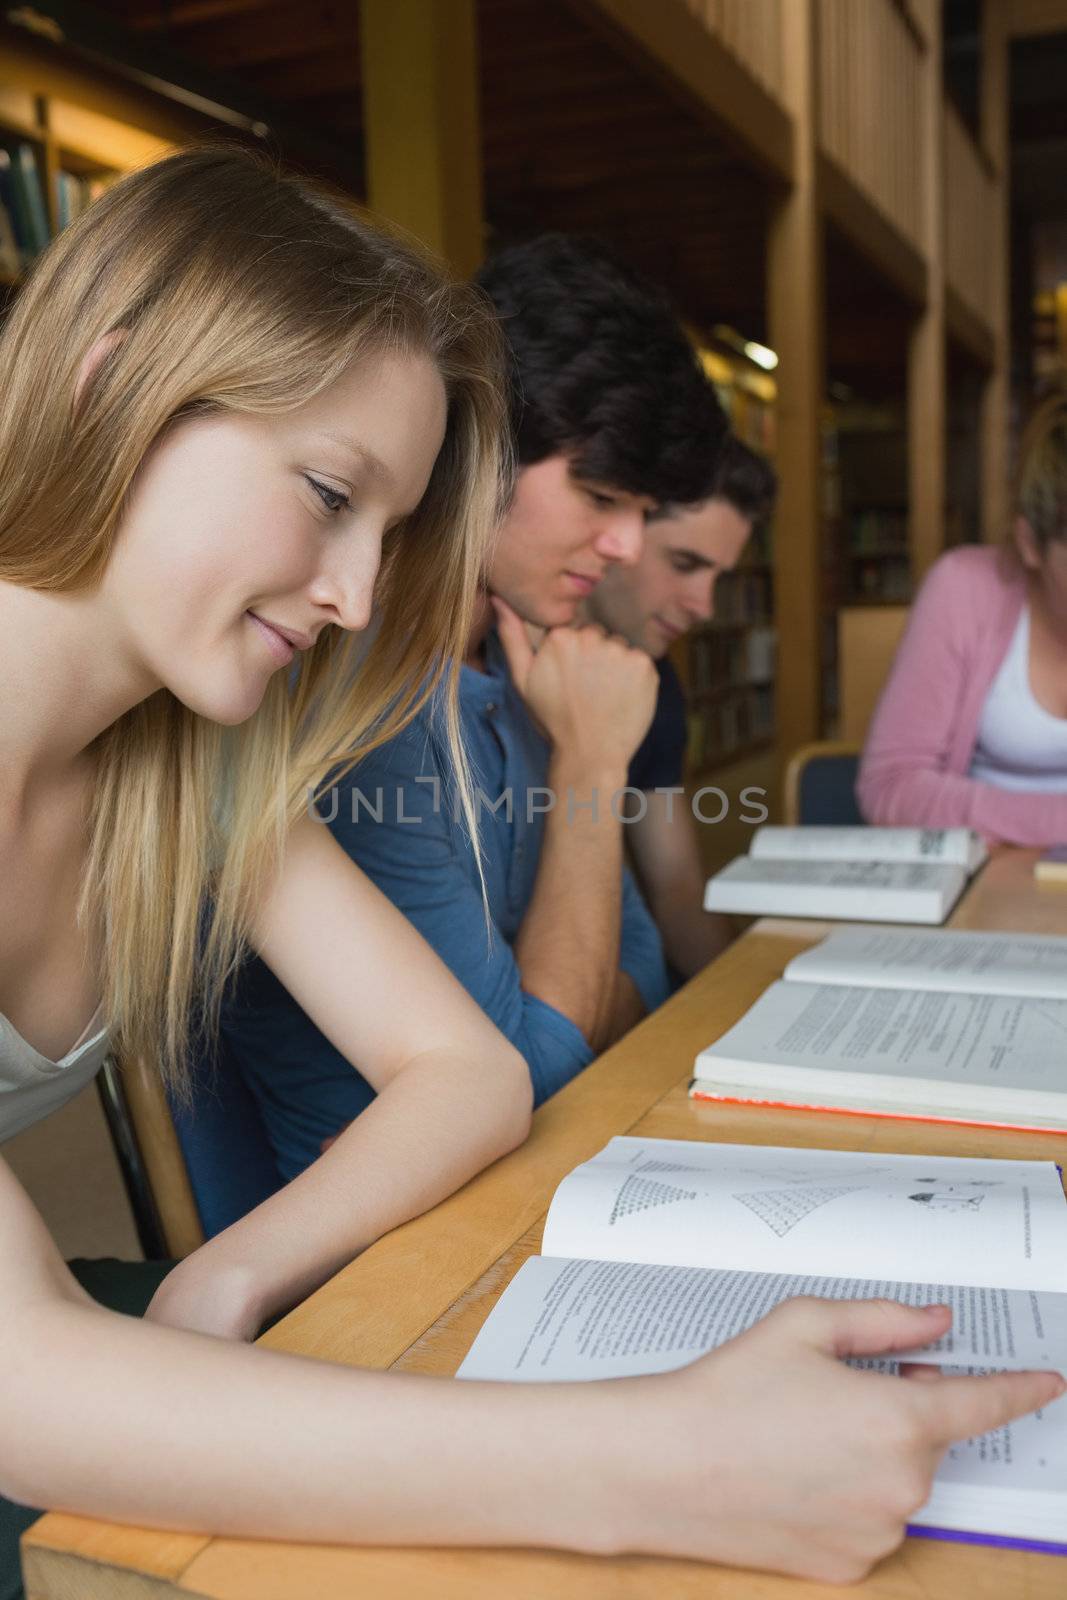 Students studying around library table in college library